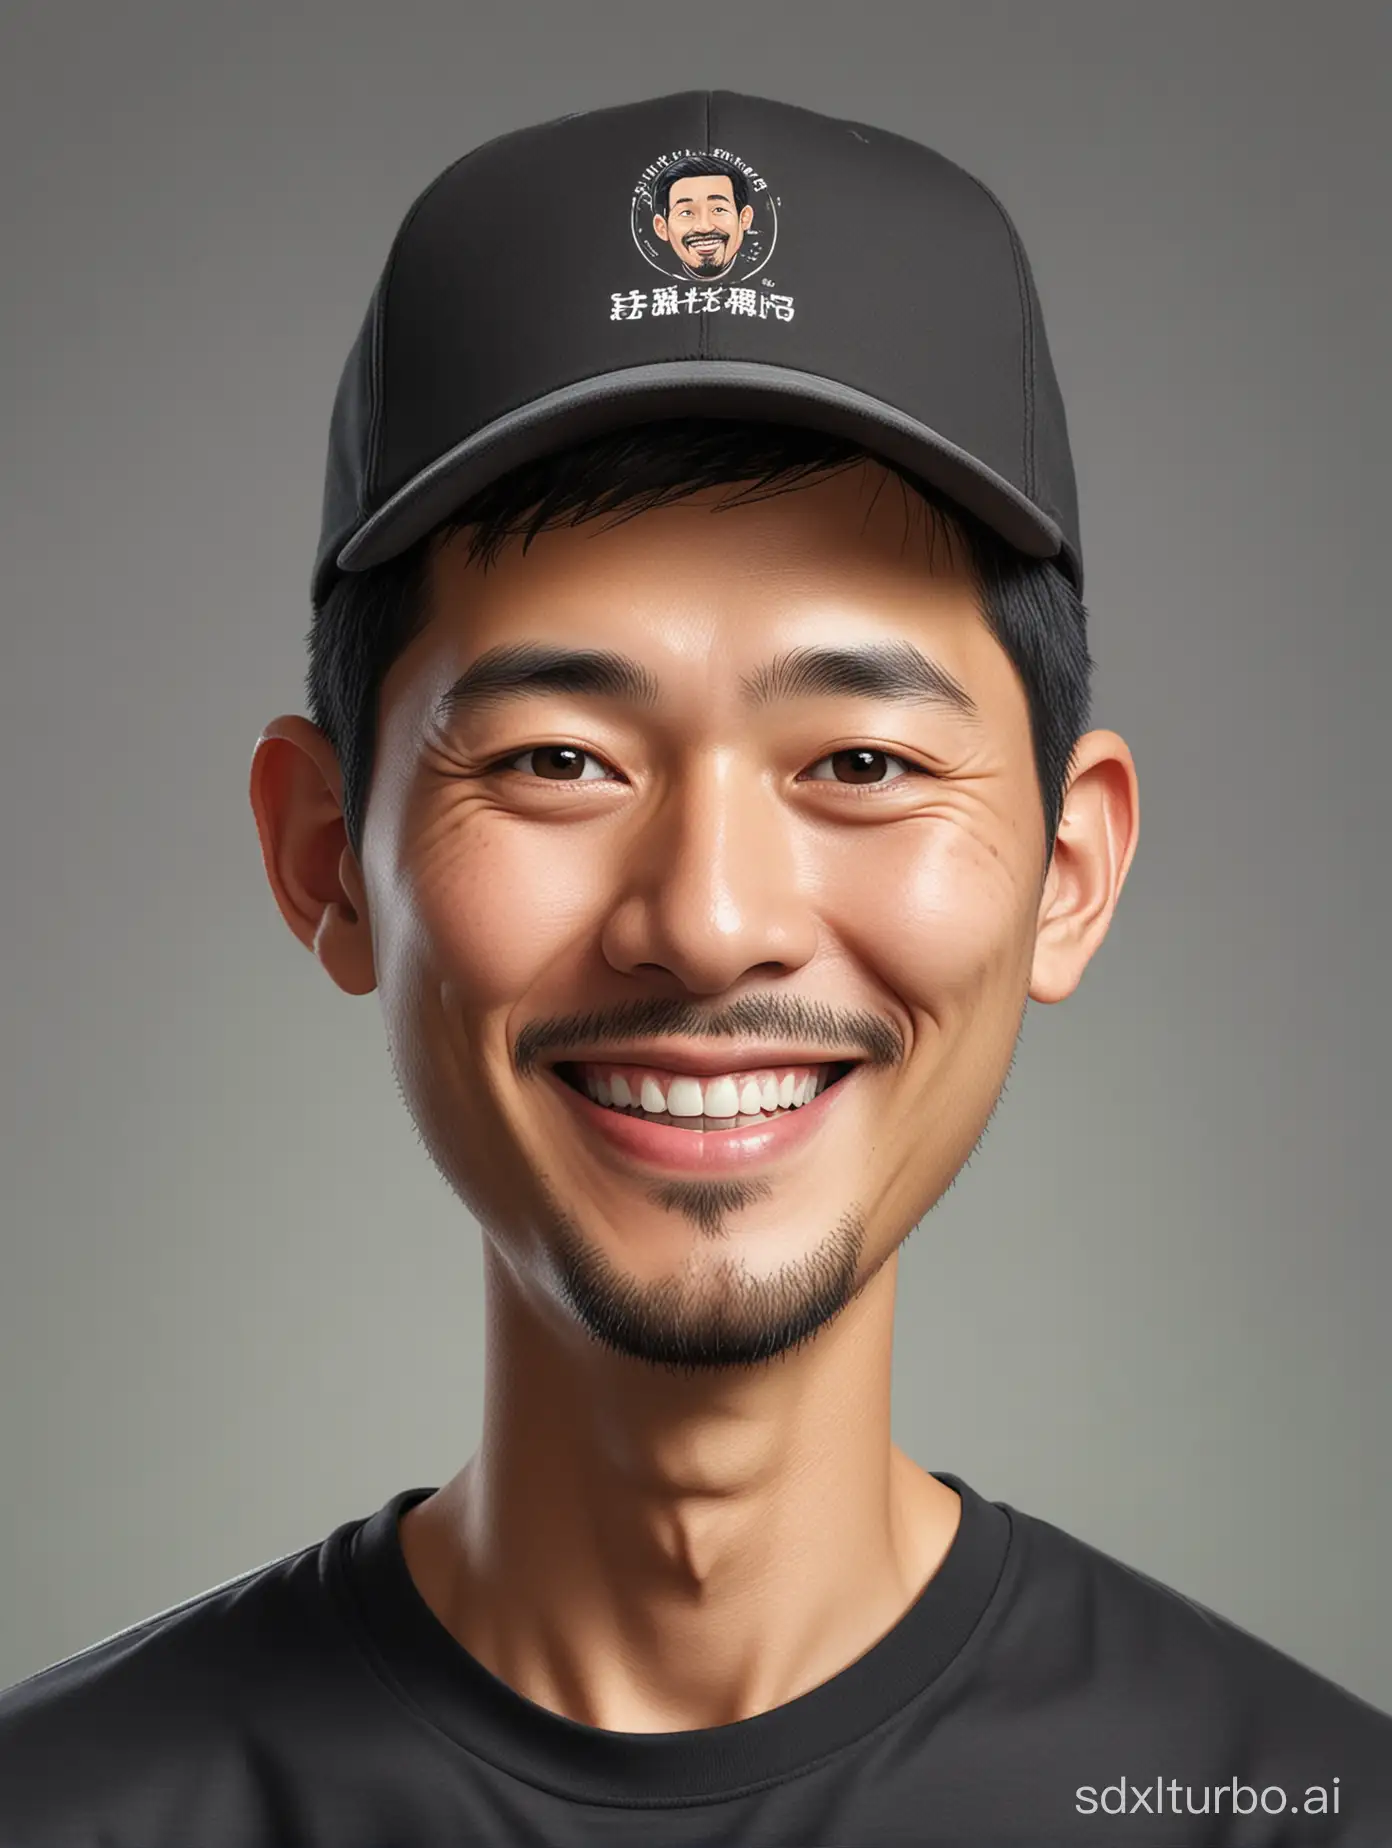 Caricature of a  chinese man with a thin beard, short black hair, wearing a  hat, wearing a black t-shirt. Smiling, Gray background